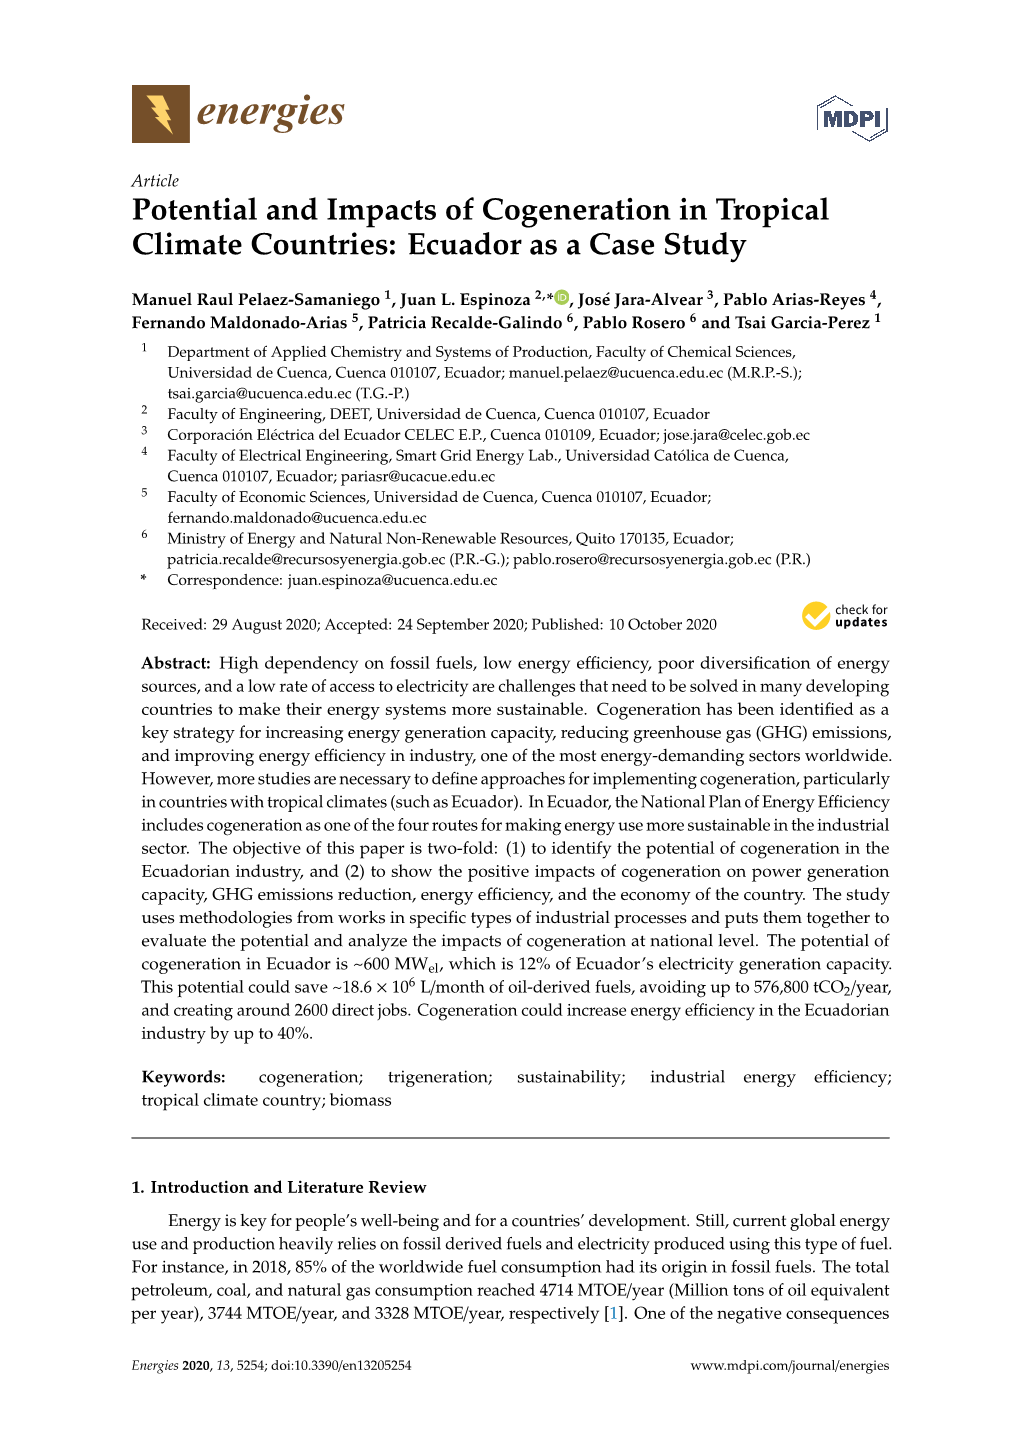 Potential and Impacts of Cogeneration in Tropical Climate Countries: Ecuador As a Case Study